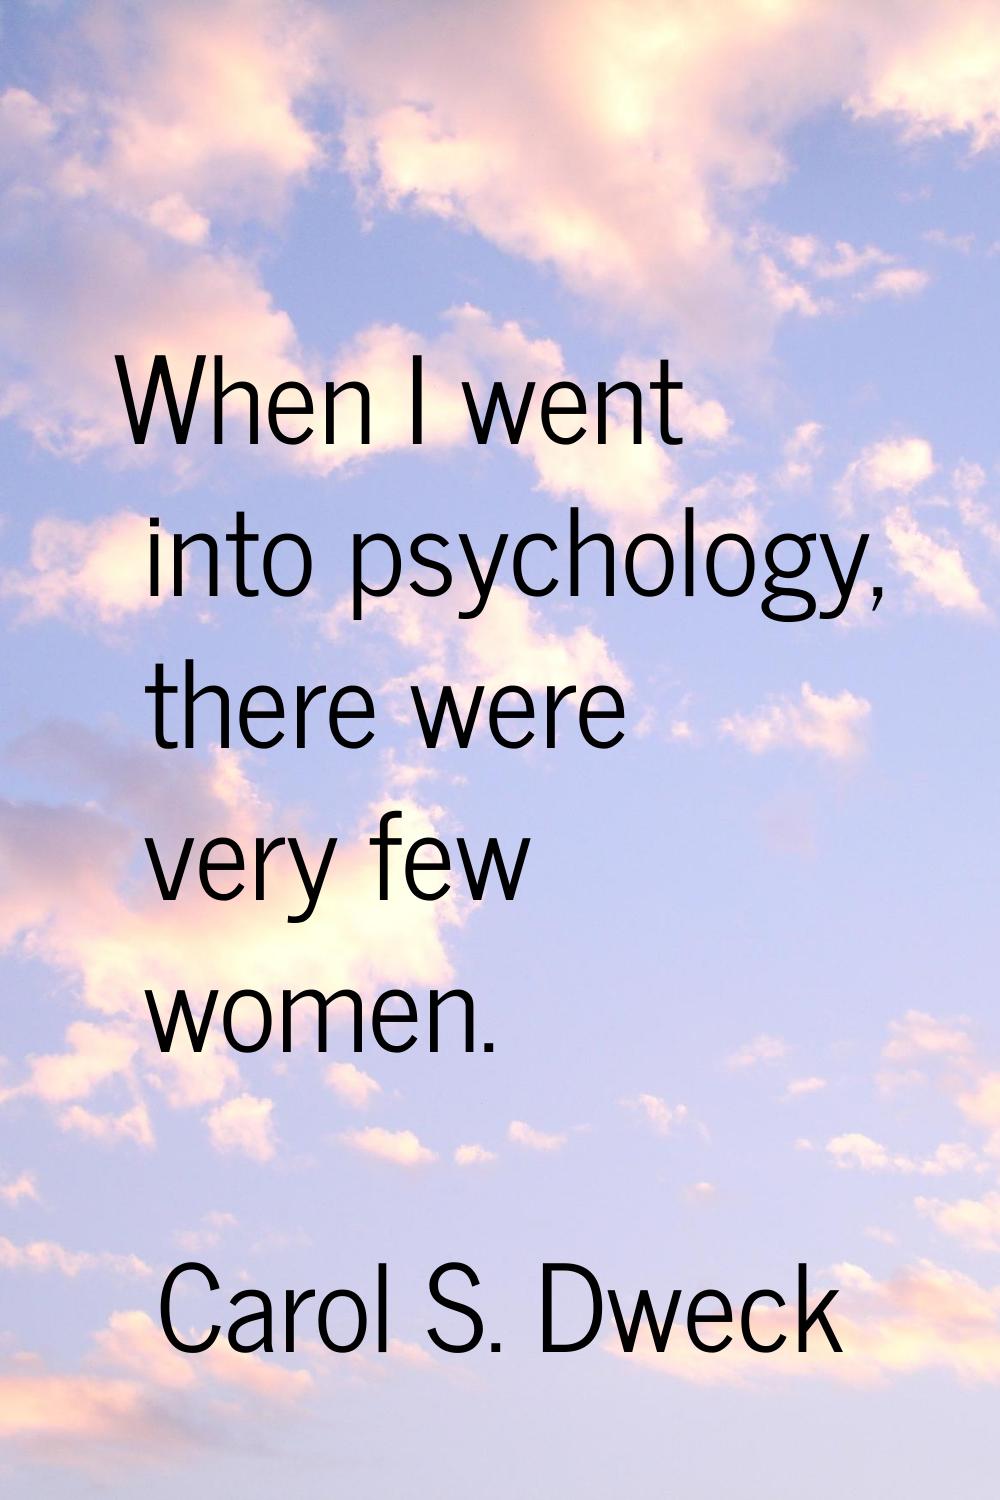 When I went into psychology, there were very few women.